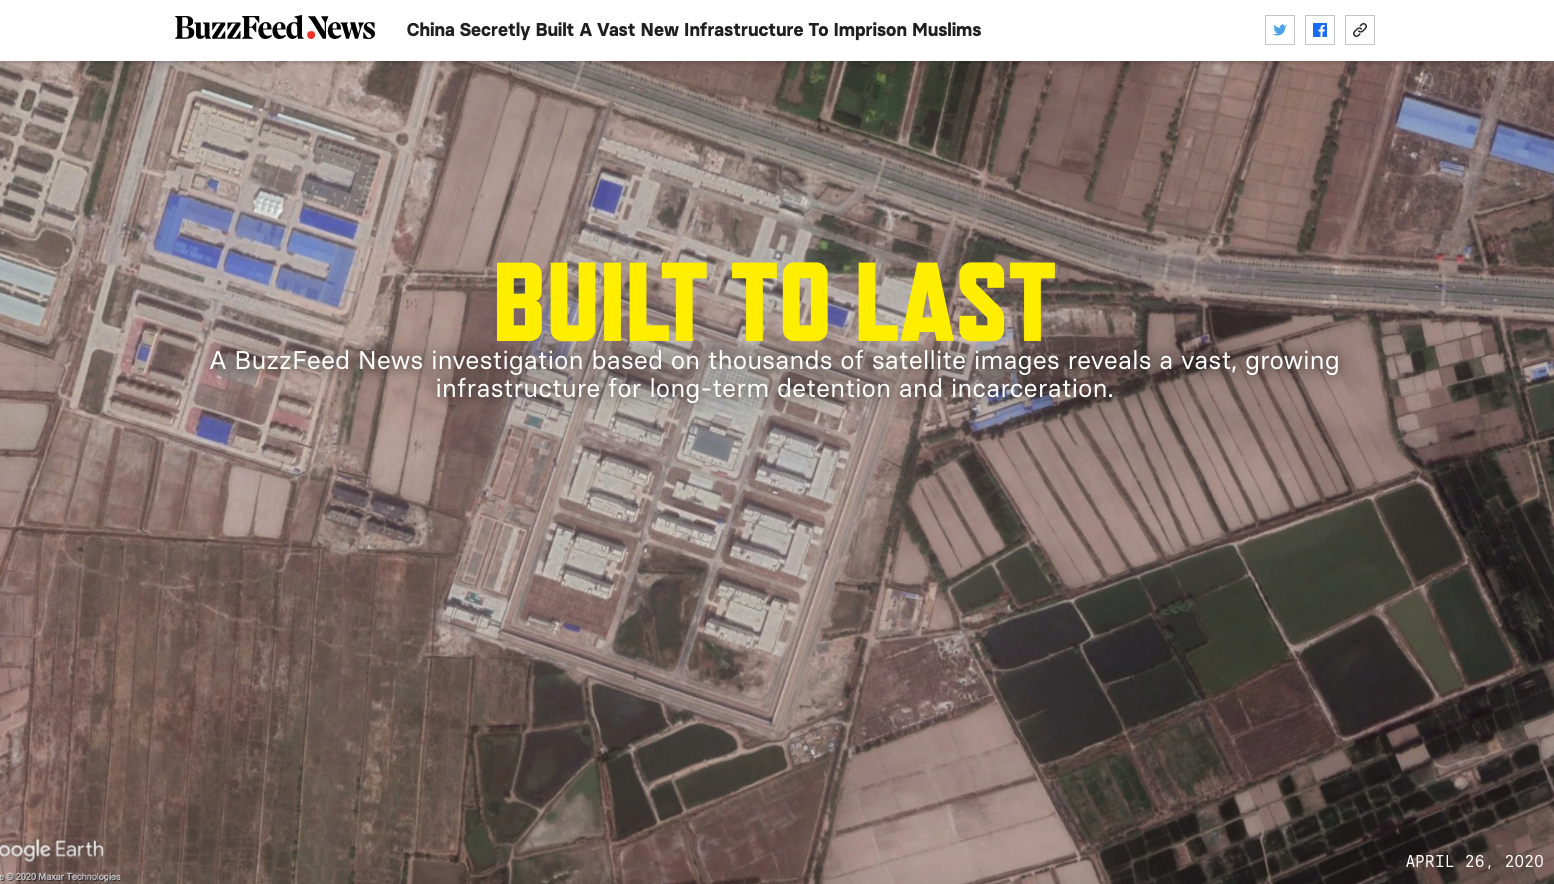 BuzzFeed News wins its first Pulitzer Prize for series on China’s mass detention of Muslims